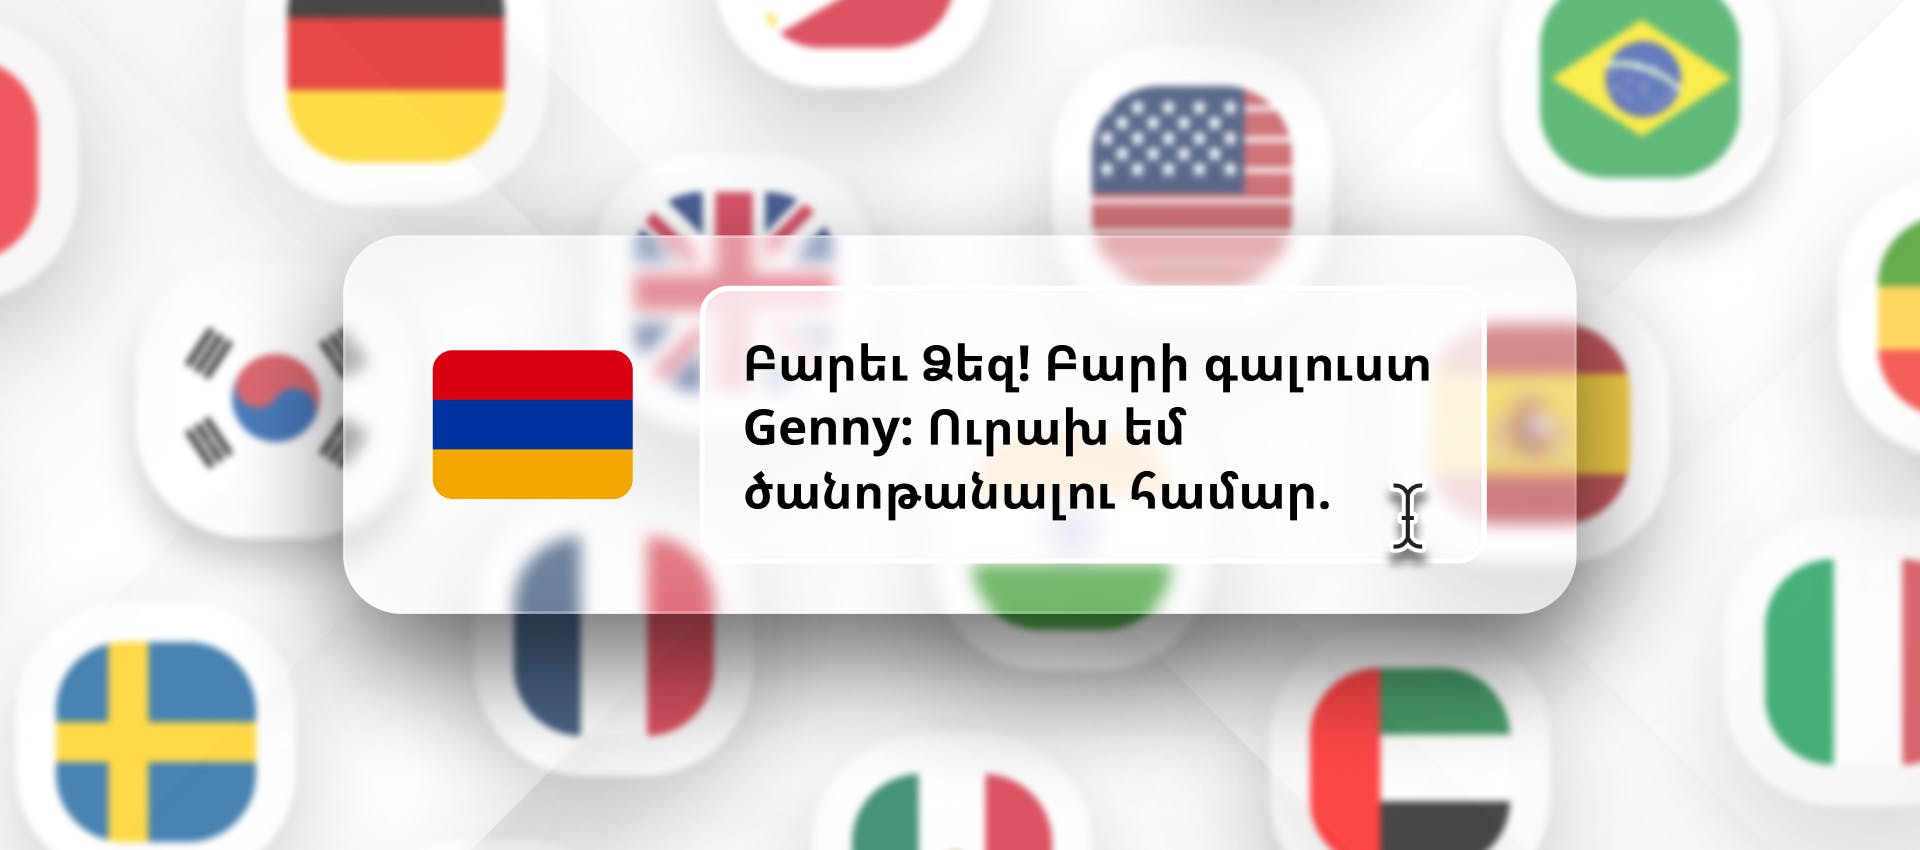 Armenian phrase for Armenian TTS generation with different flags in the background